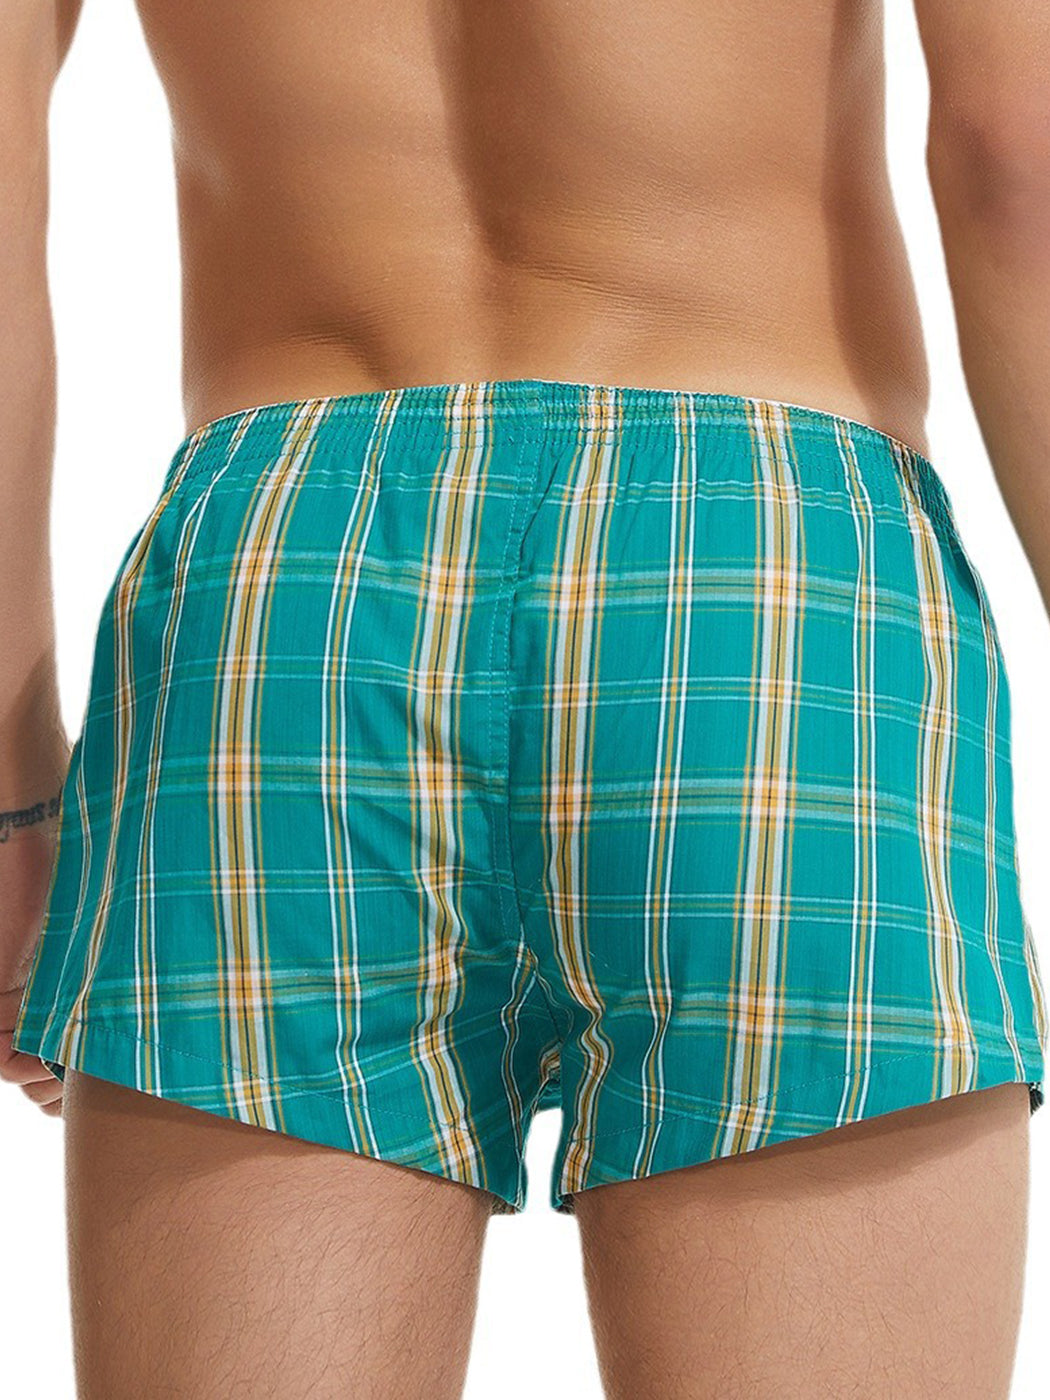 Men’s Vent Classic Plaid Cotton Boxers With Fly